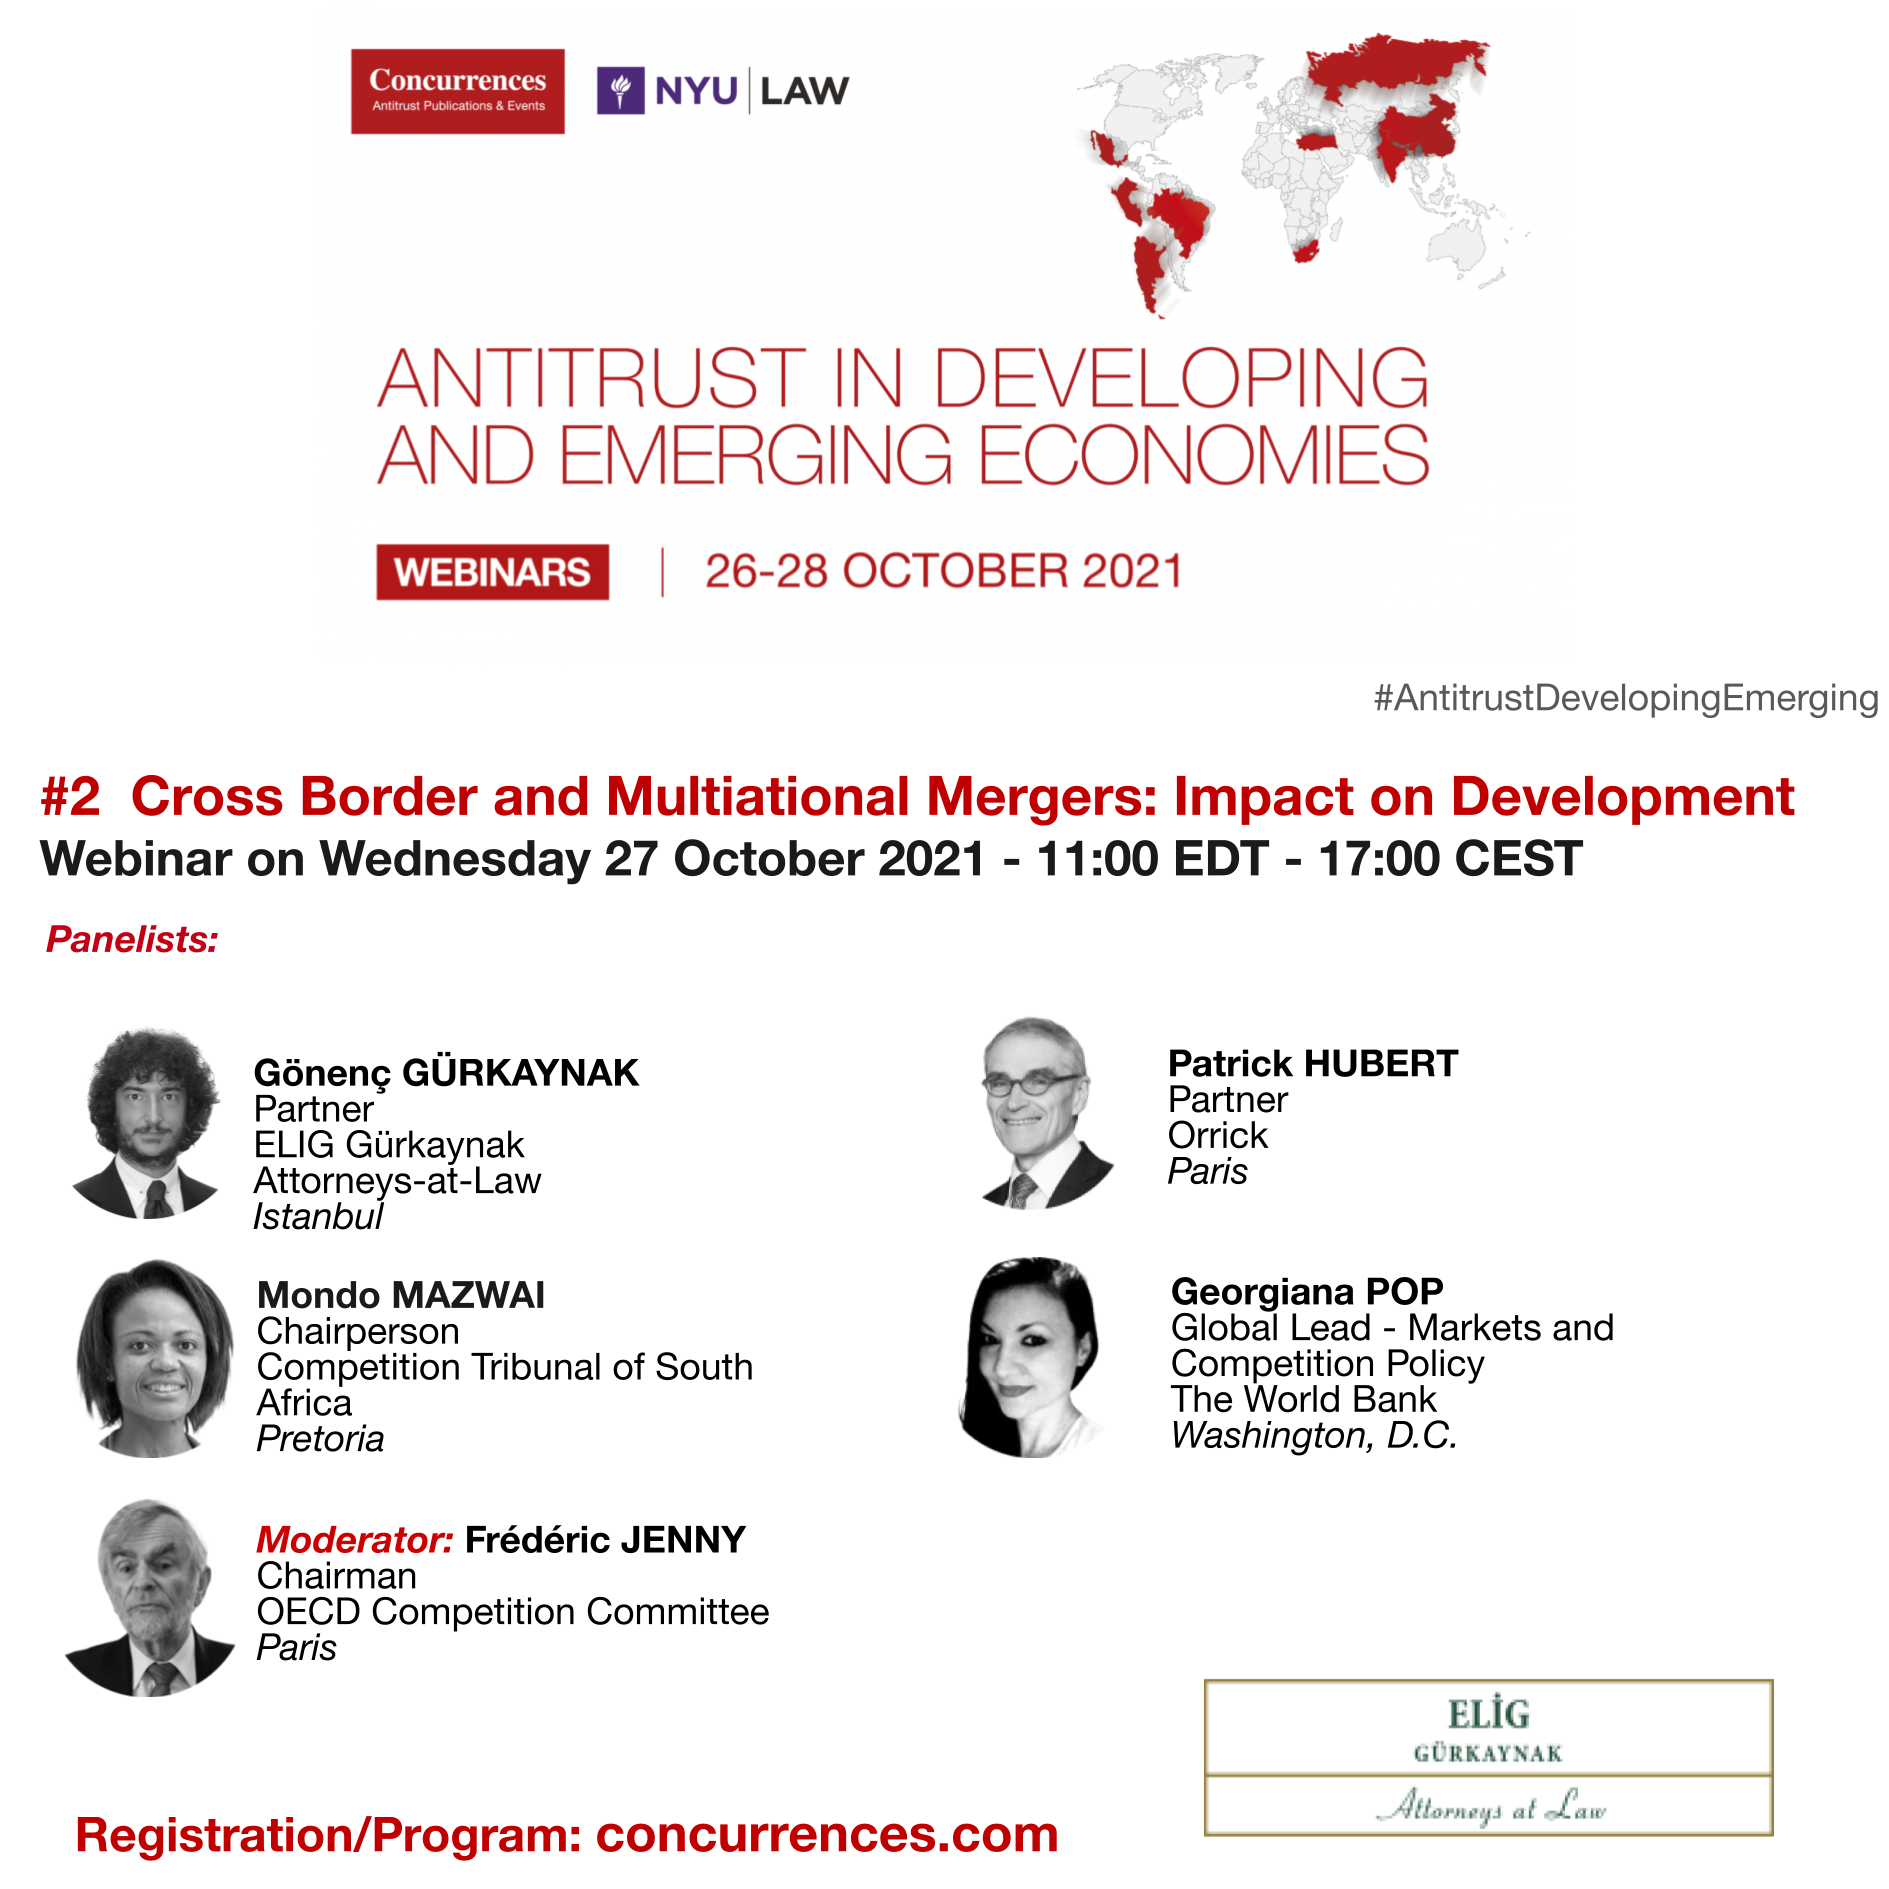 Concurrences Antitrust in Developing and Emerging Economies Conference 2021